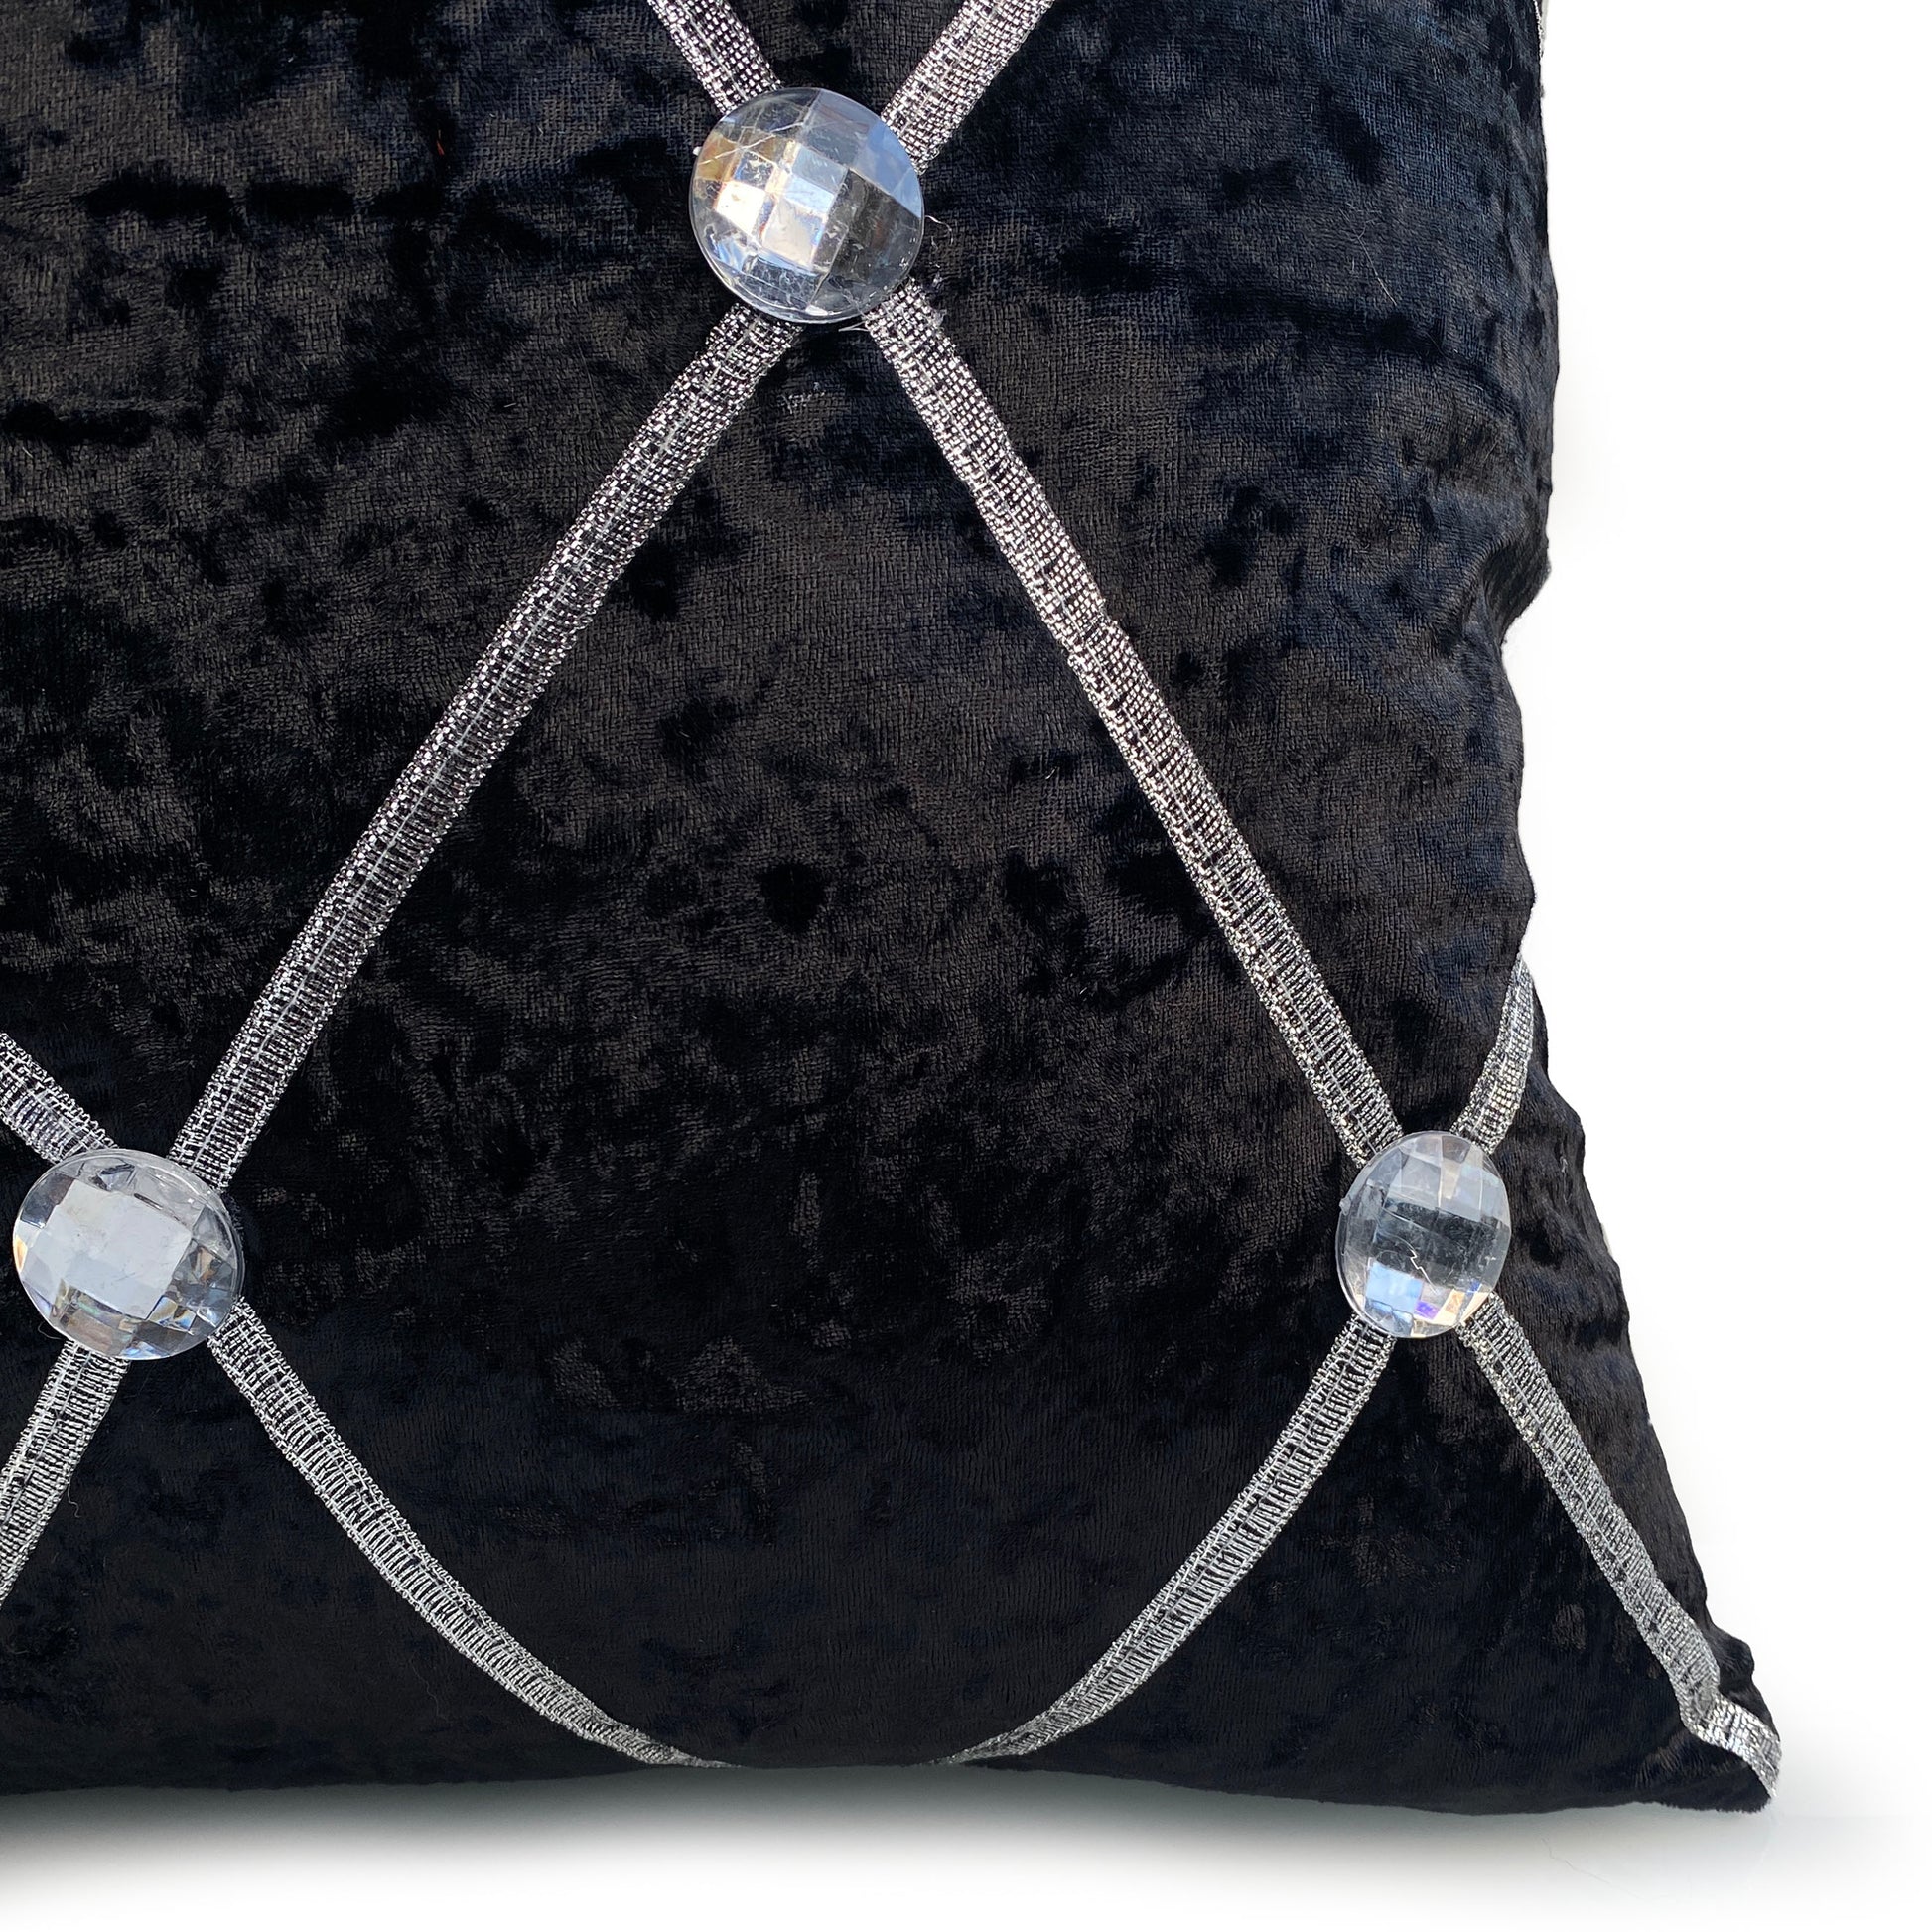 Large Crush Velvet Cushions or Covers Diamante Chesterfield  3 Sizes BLACK closer view